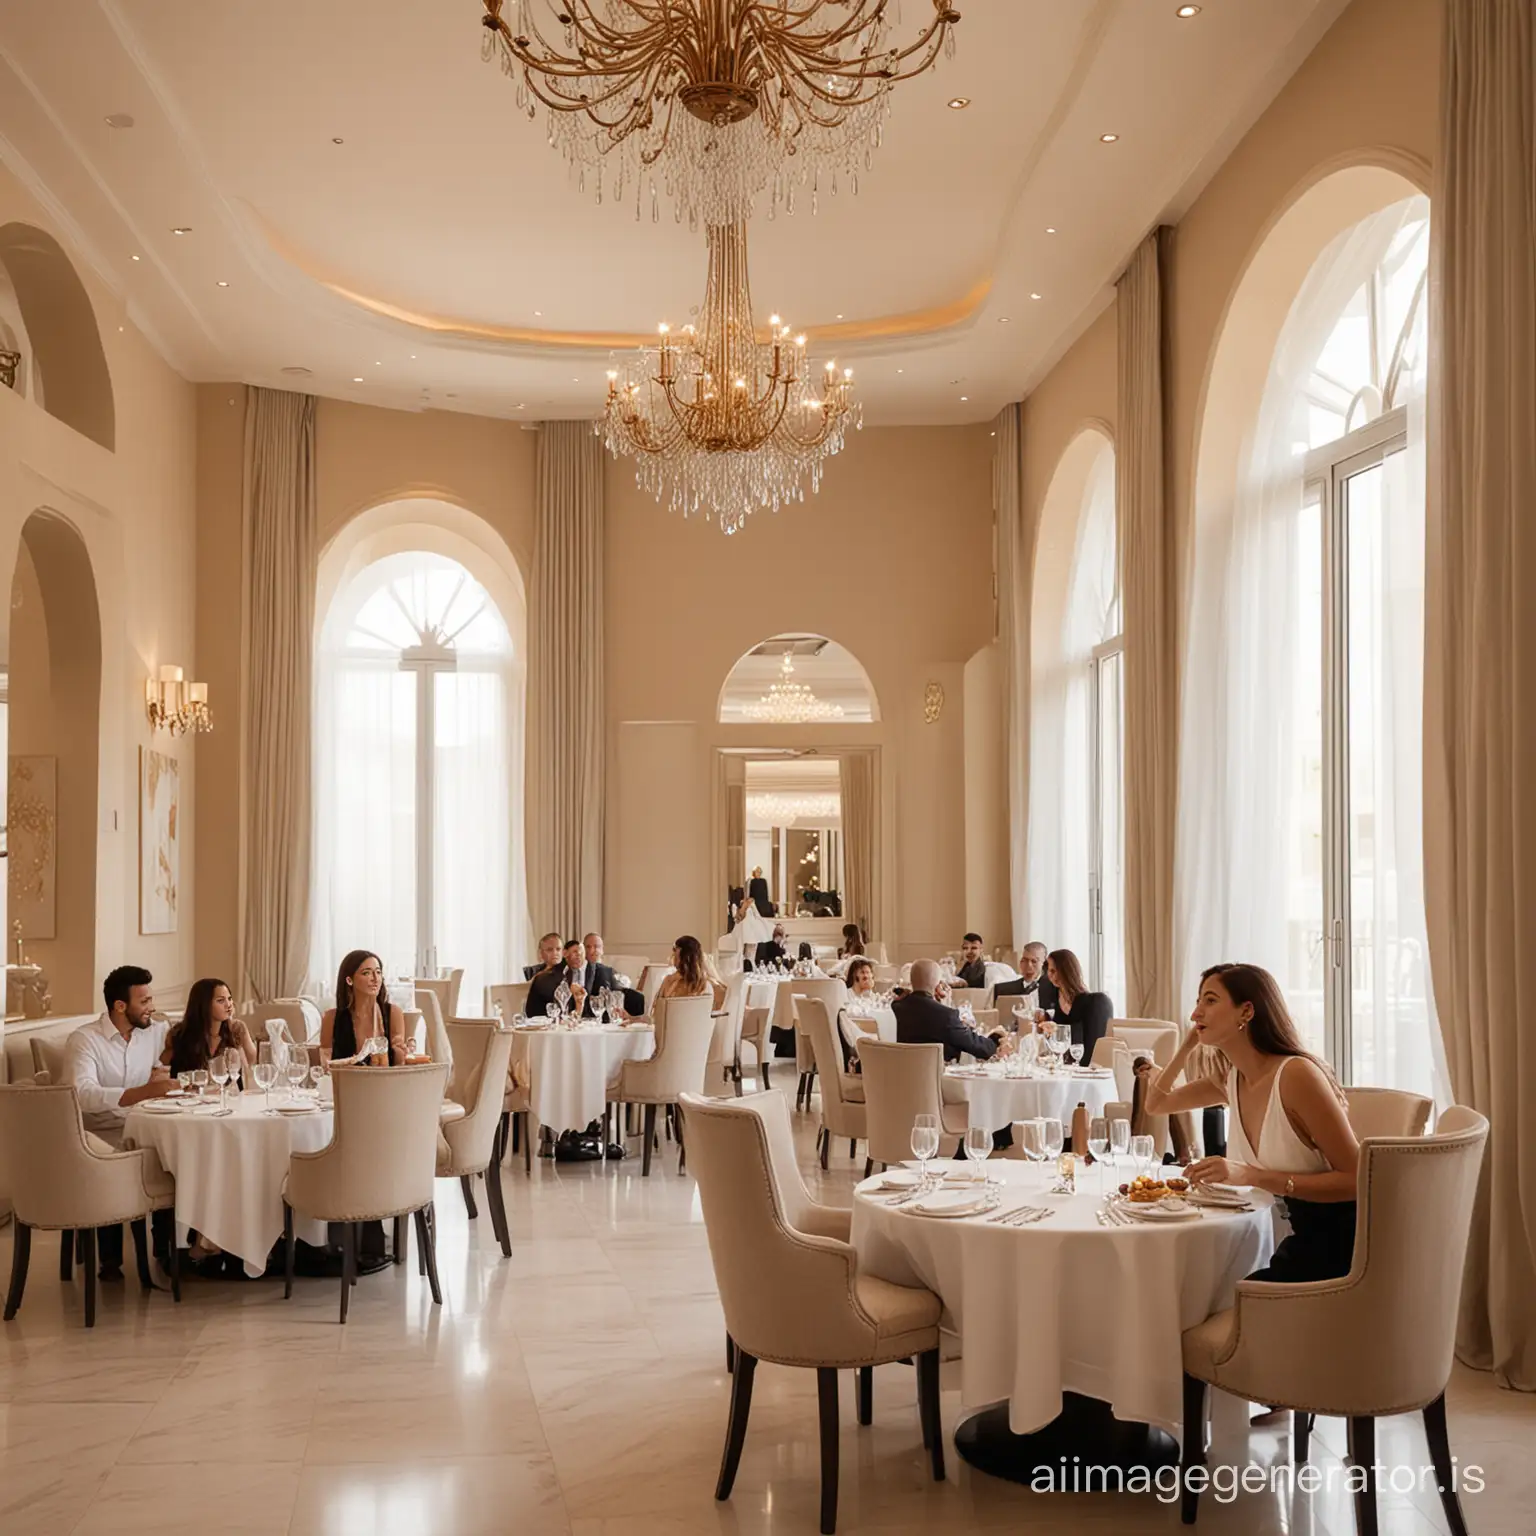 luxury woman and men in a luxury Italian  restaurant in a 5 star hotel in Bahrain, people sitting at the tables eating, the interior is bright with light colors and simple furniture